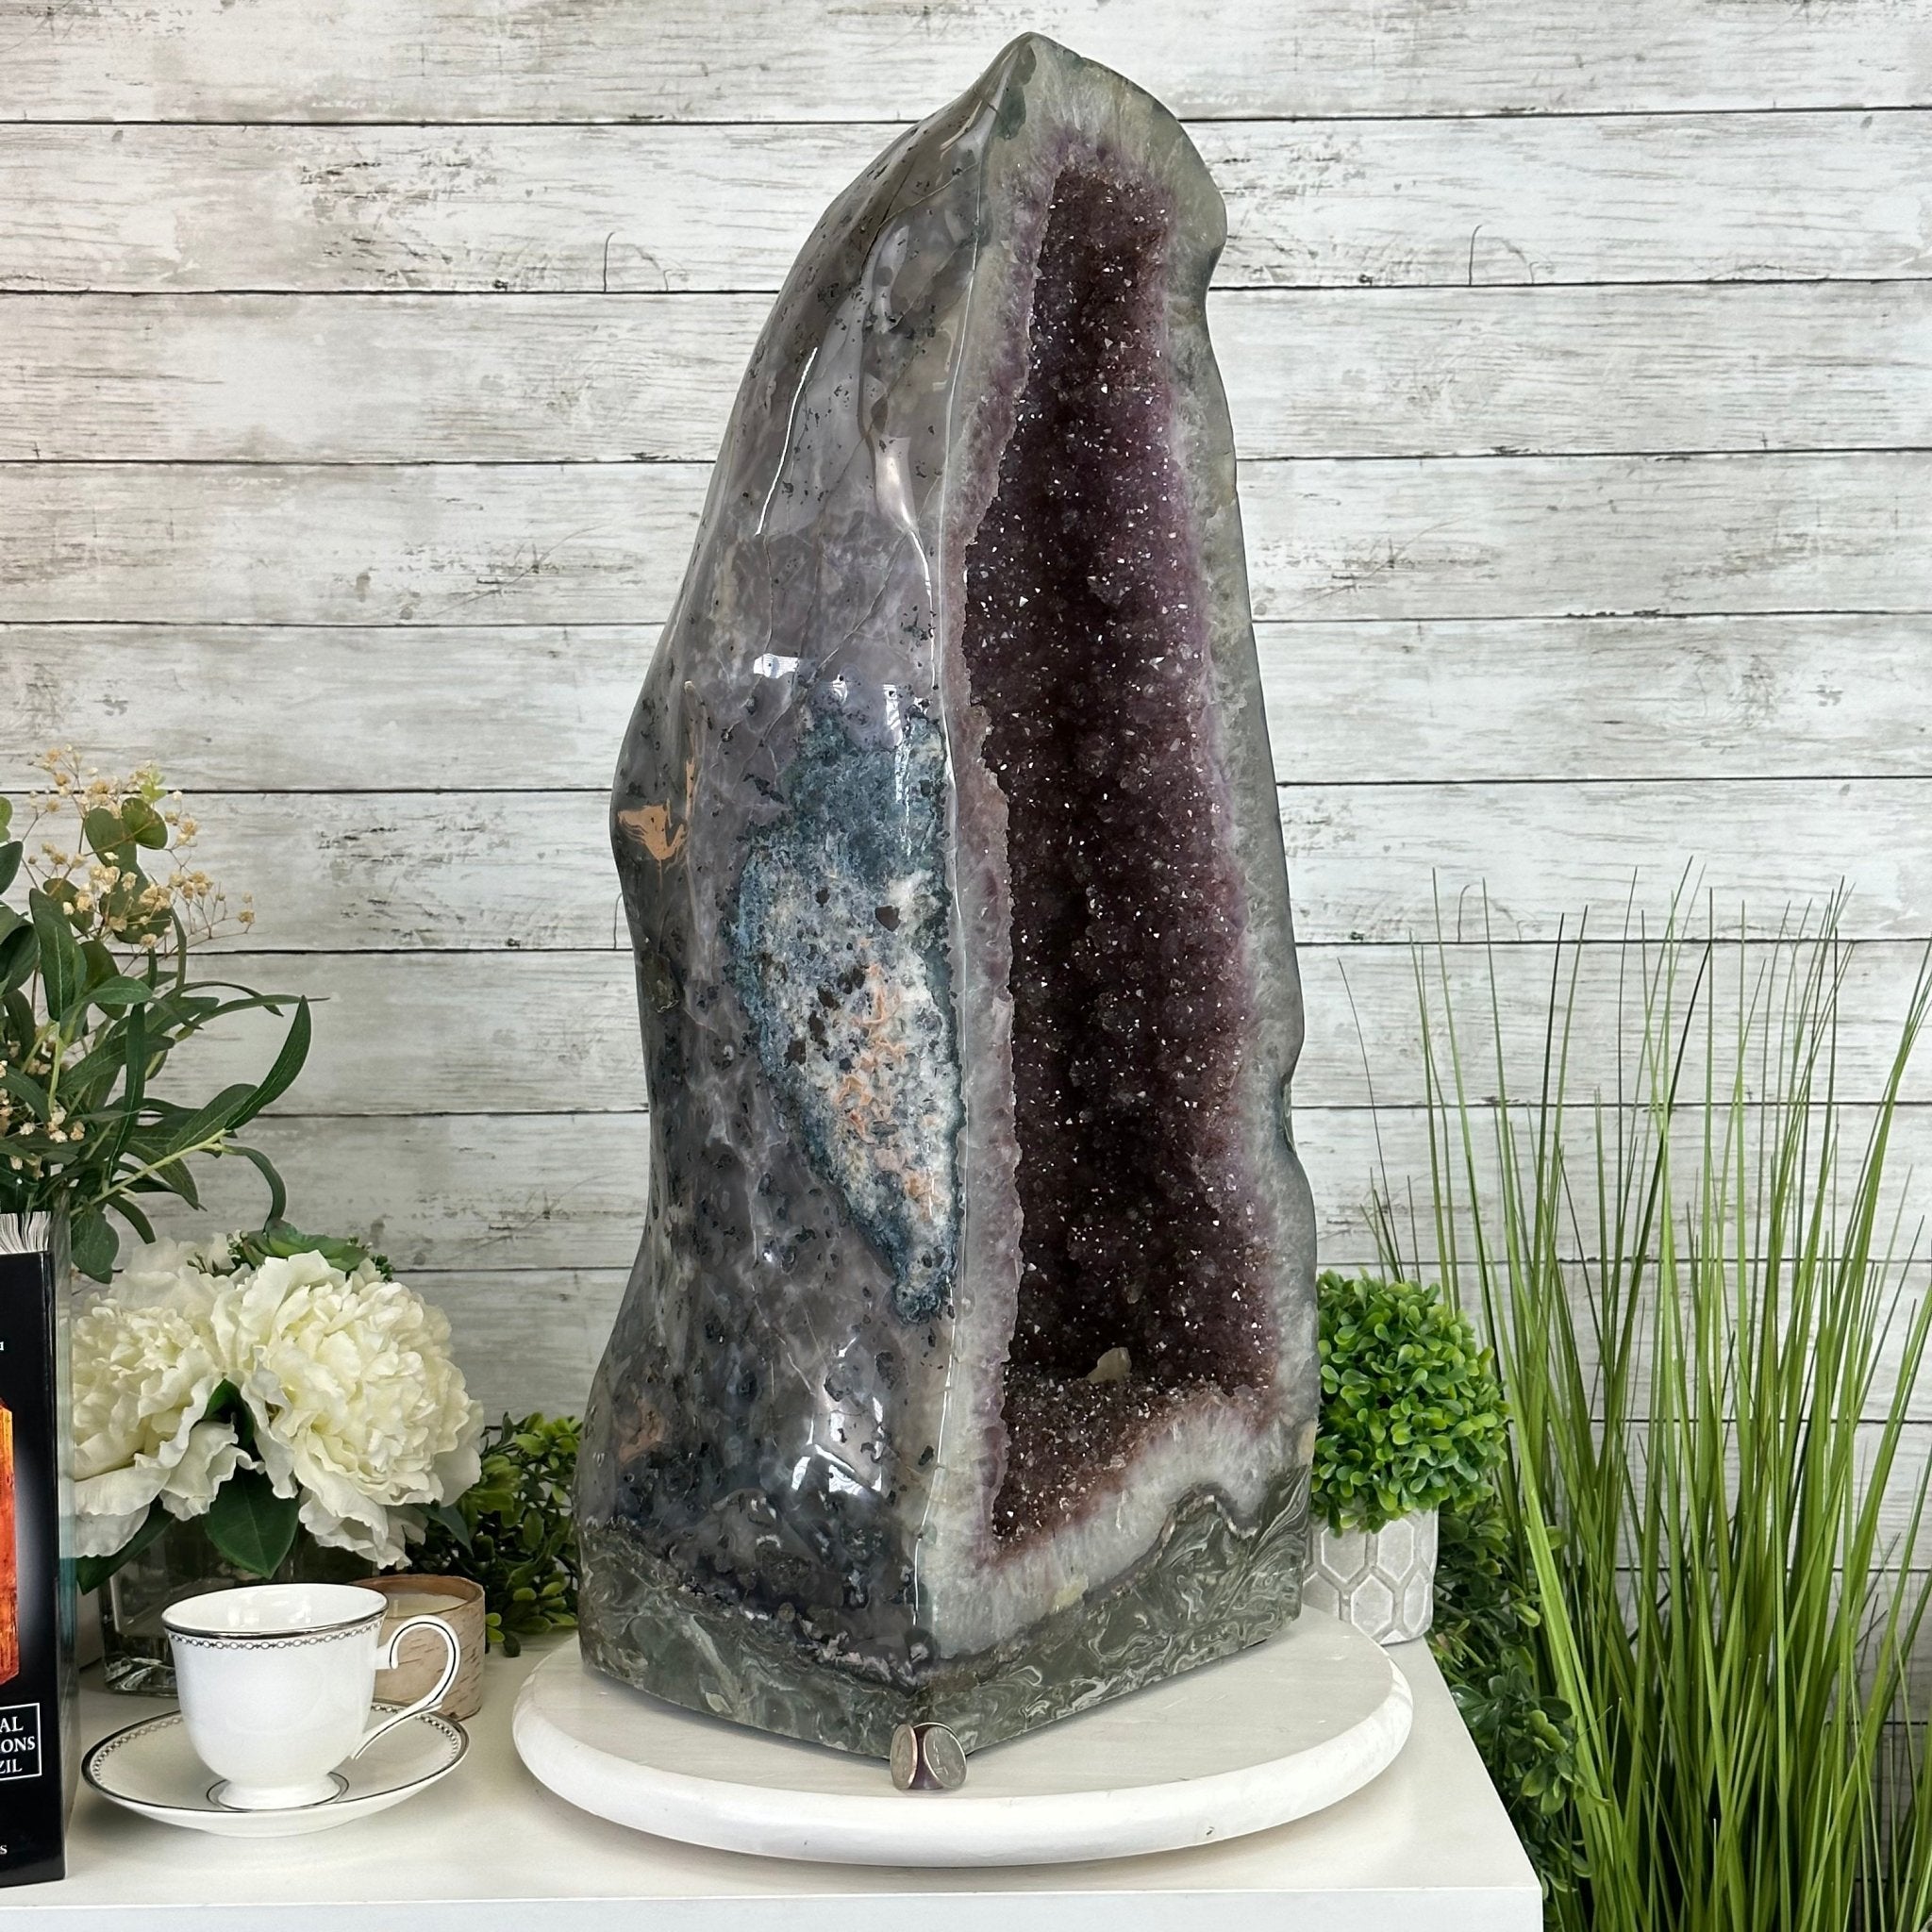 Extra Quality Polished Brazilian Amethyst Cathedral, 84.8 lbs & 26.2" tall Model #5602-0164 by Brazil Gems - Brazil GemsBrazil GemsExtra Quality Polished Brazilian Amethyst Cathedral, 84.8 lbs & 26.2" tall Model #5602-0164 by Brazil GemsPolished Cathedrals5602-0164